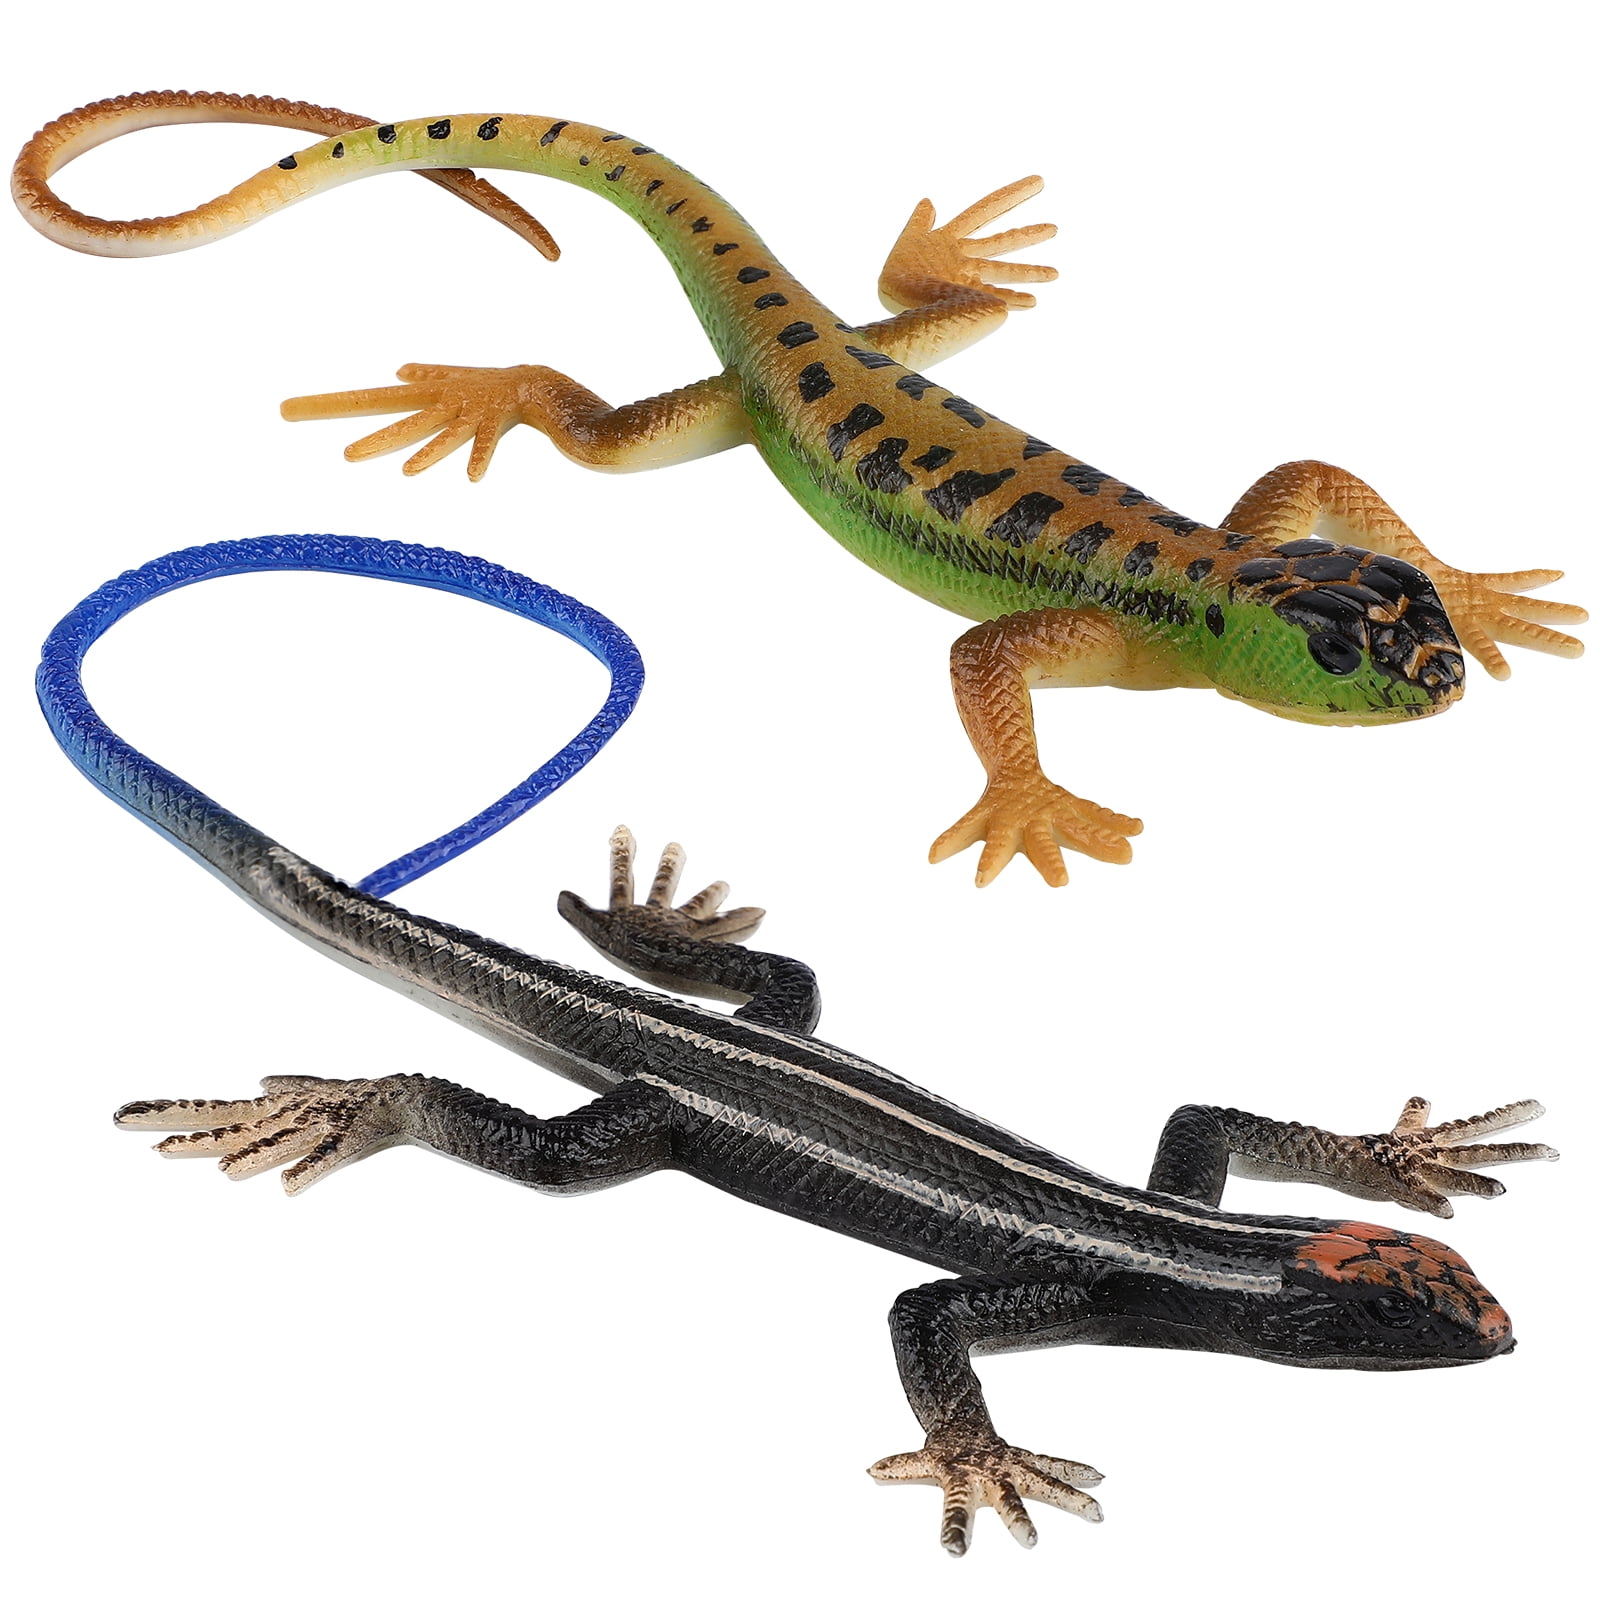 Lizard Toys Lizards Fake Realistic Reptile Model Action Figure Snake ...